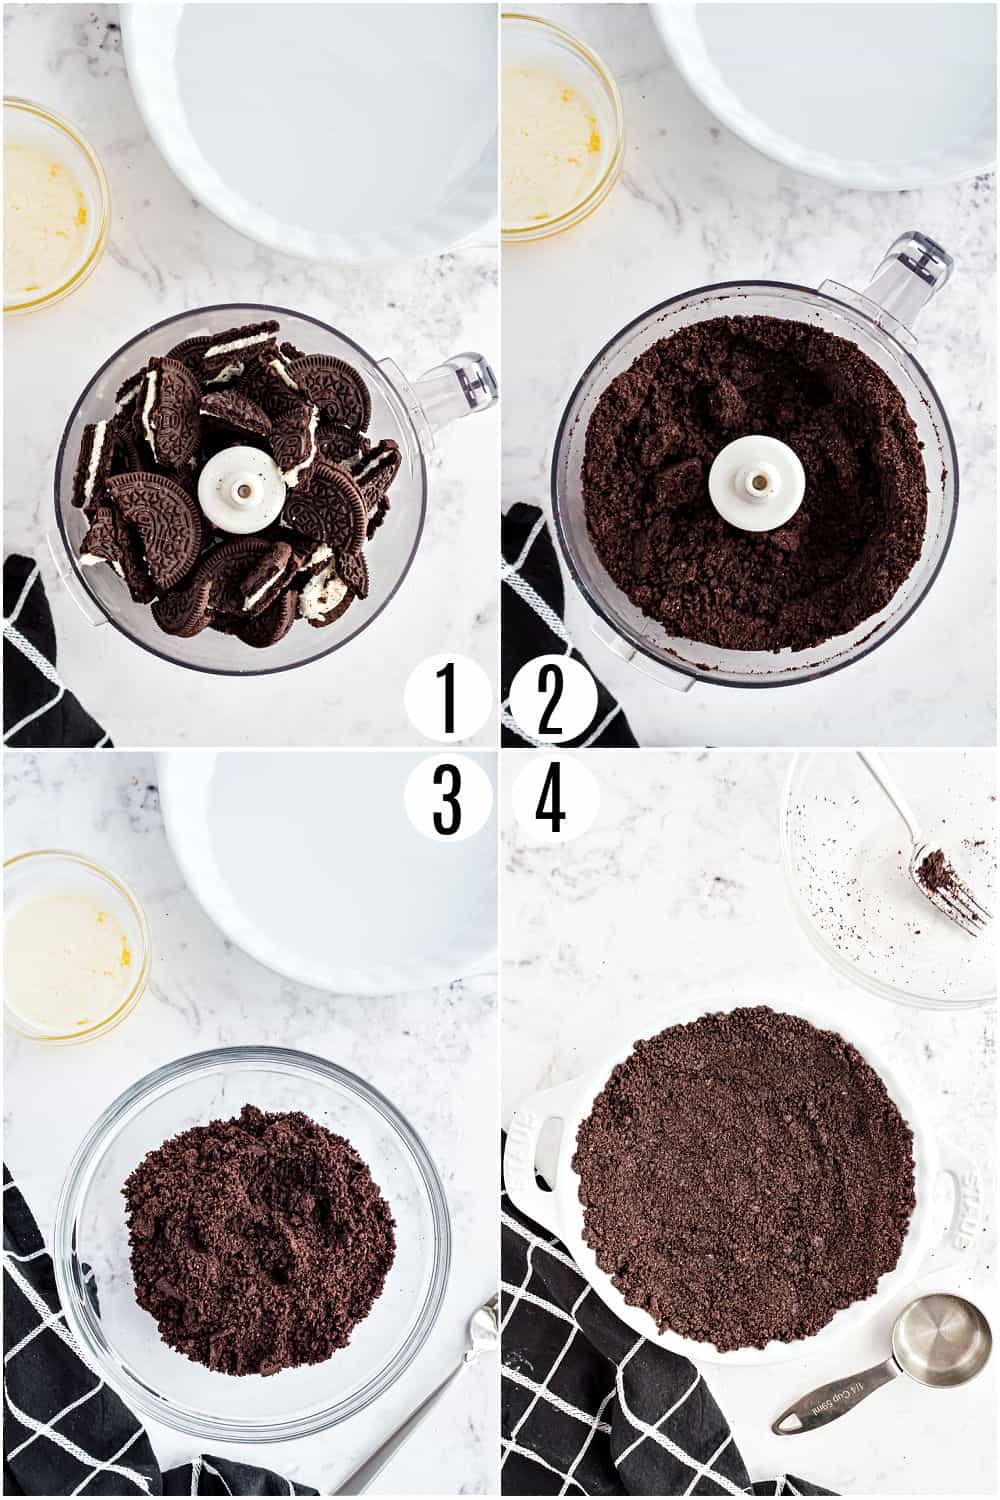 Step by step photos showing how to make an oreo pie crust.